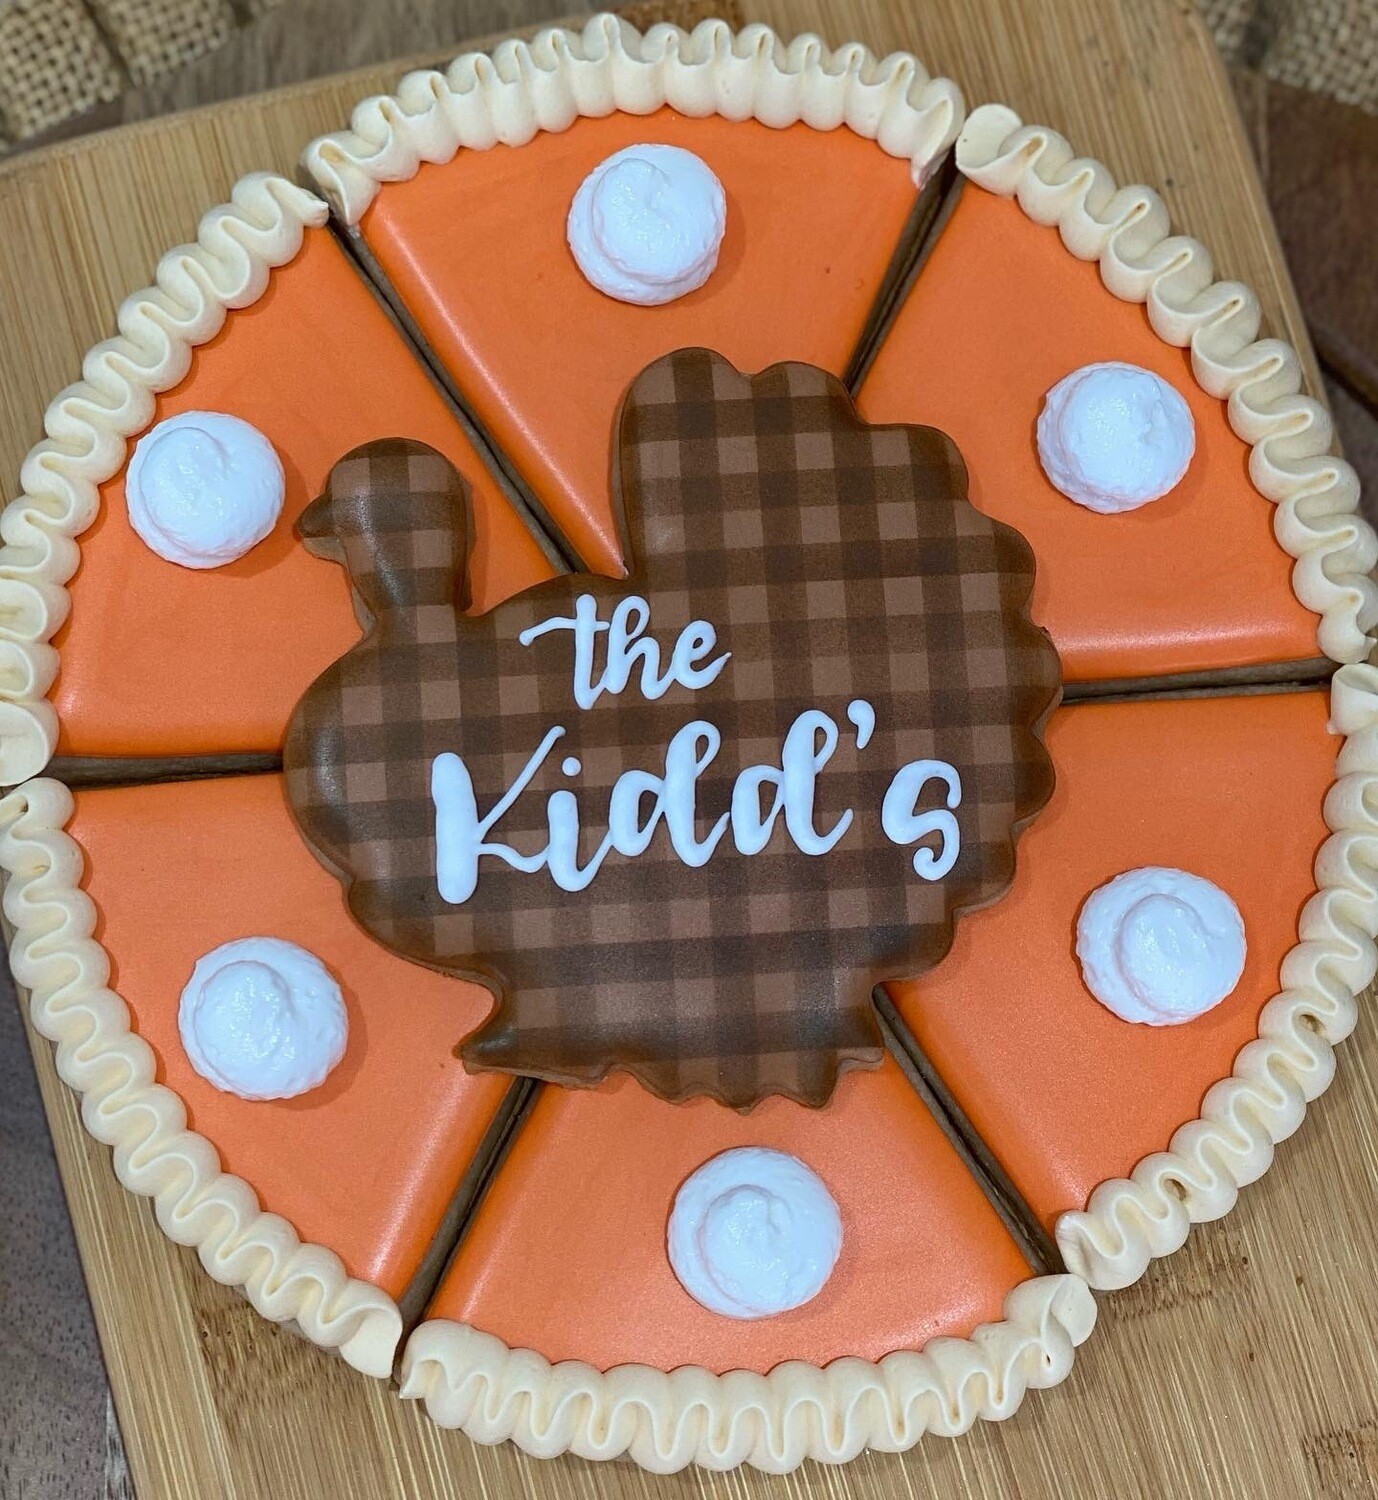 Personalized Cookie "Pie"